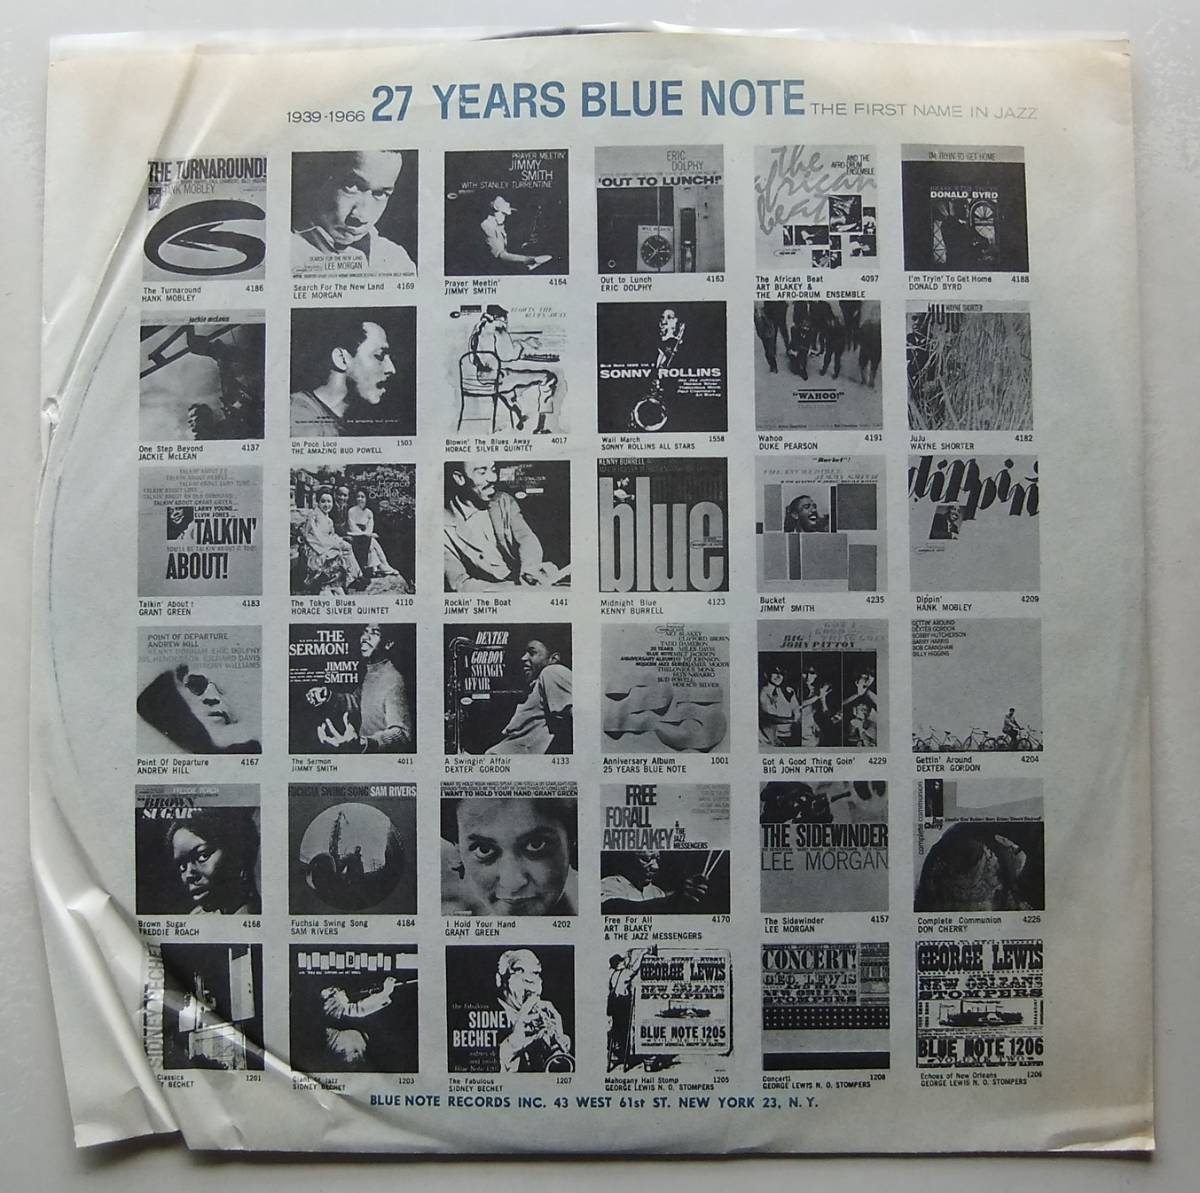 ◆ THE 3 SOUNDS / Hey There ◆ Blue Note ST-84102 (NY:VAN GELDER) ◆ V_画像6